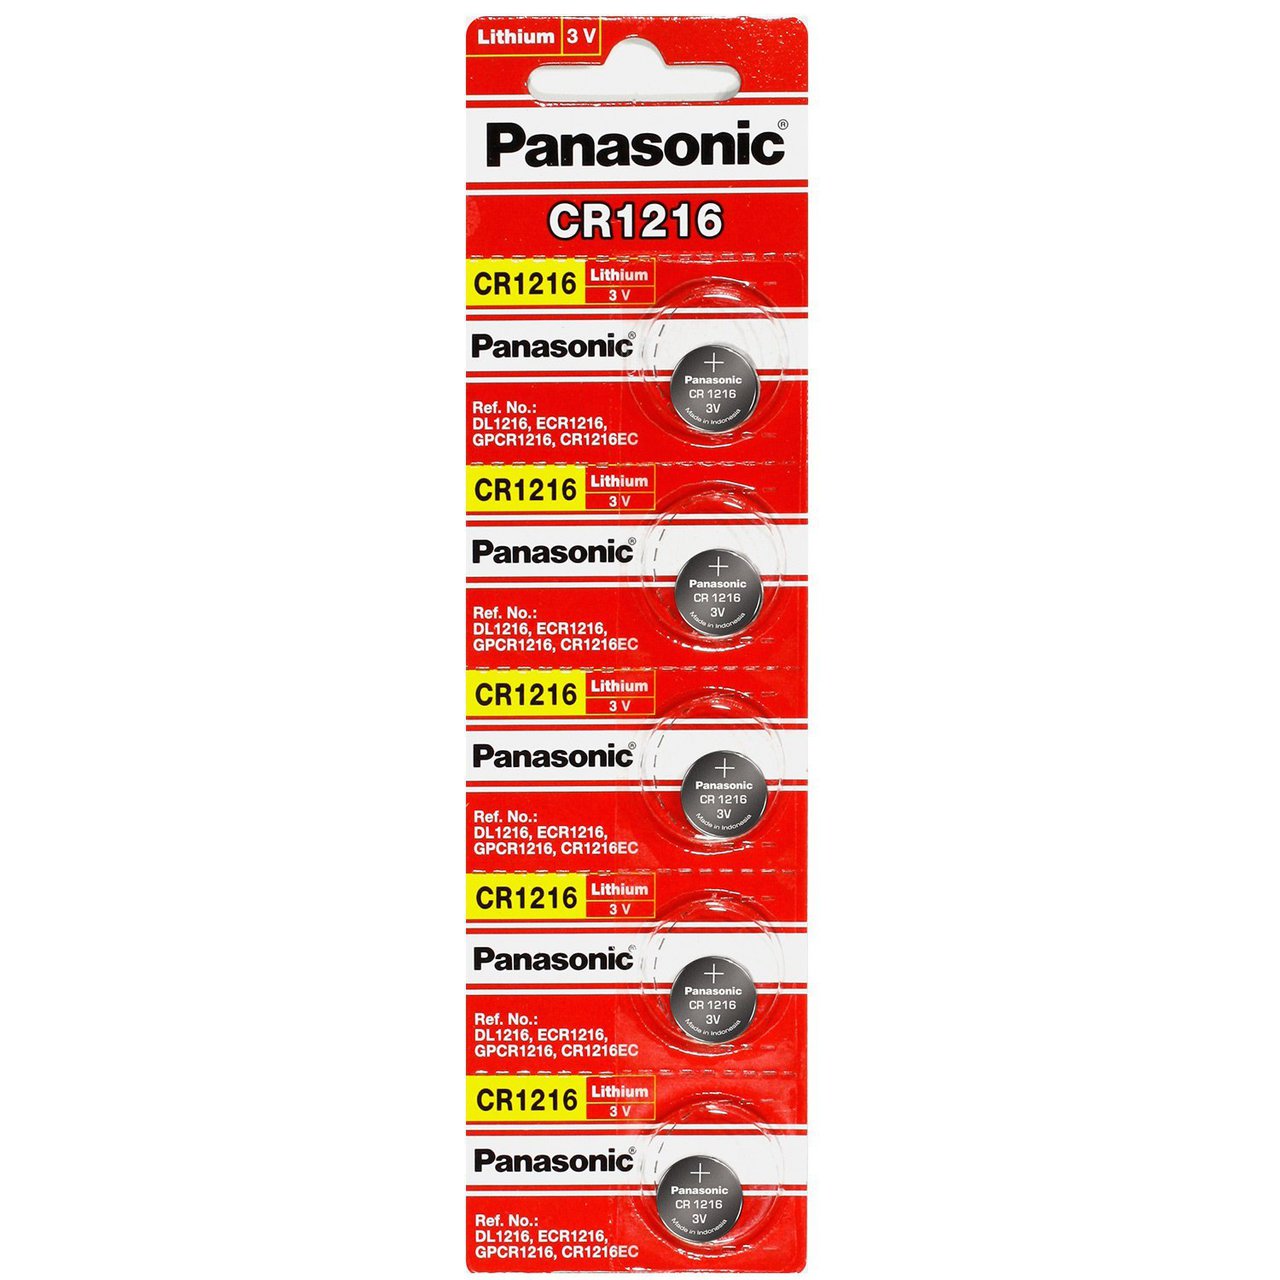 Panasonic CR1216 3V Lithium Coin Battery - 5 Pack + FREE SHIPPING!